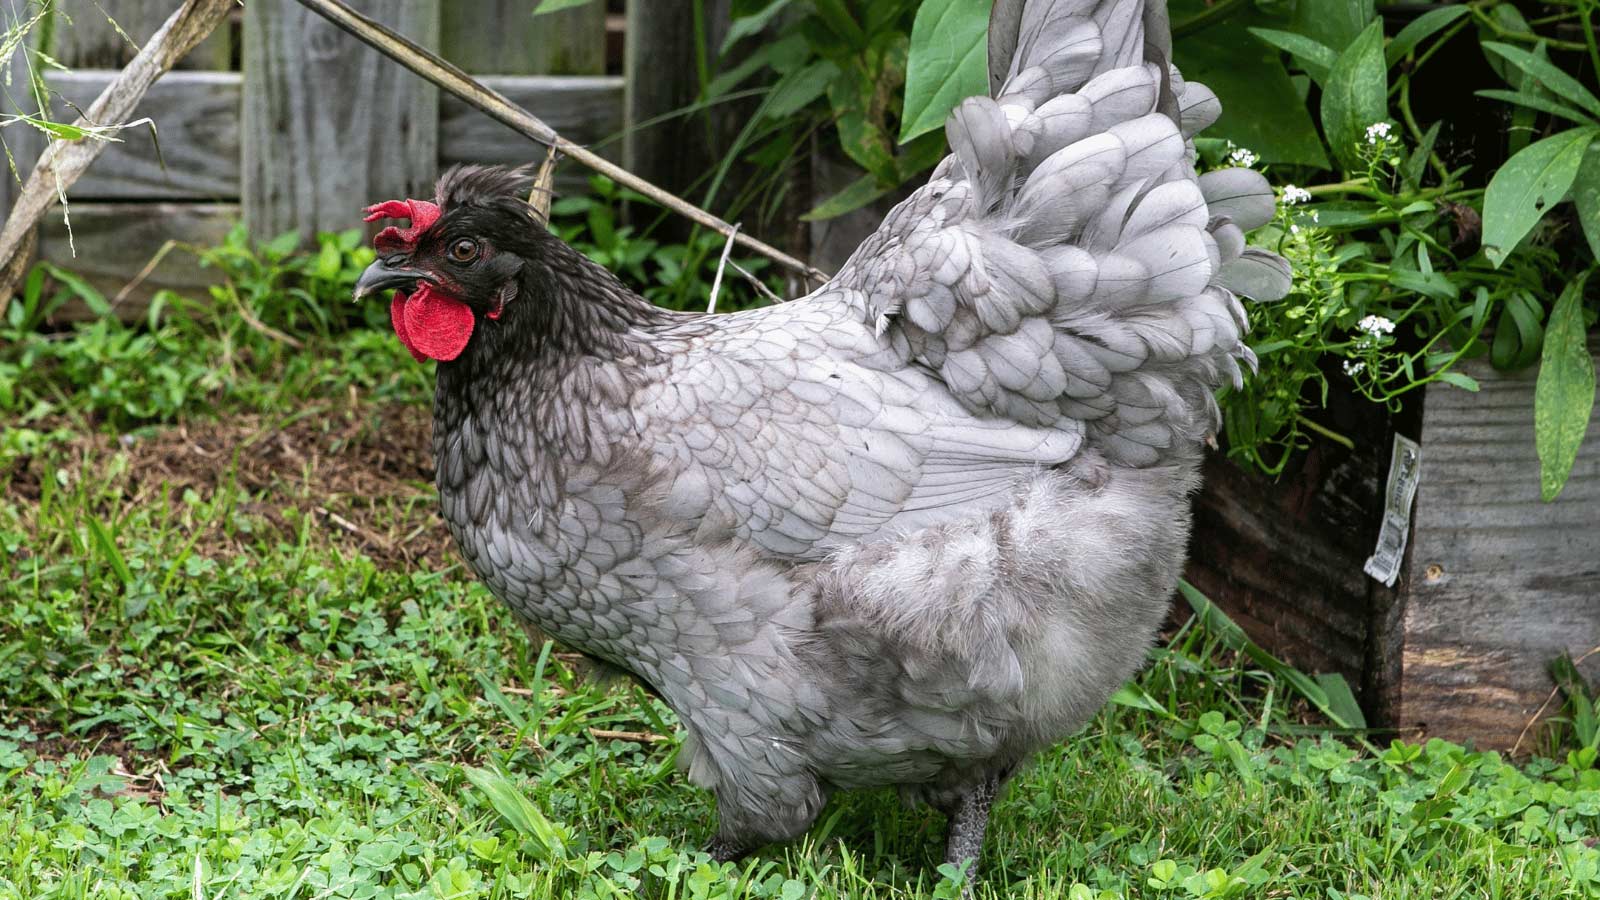 sapphire olive egger chicken breed